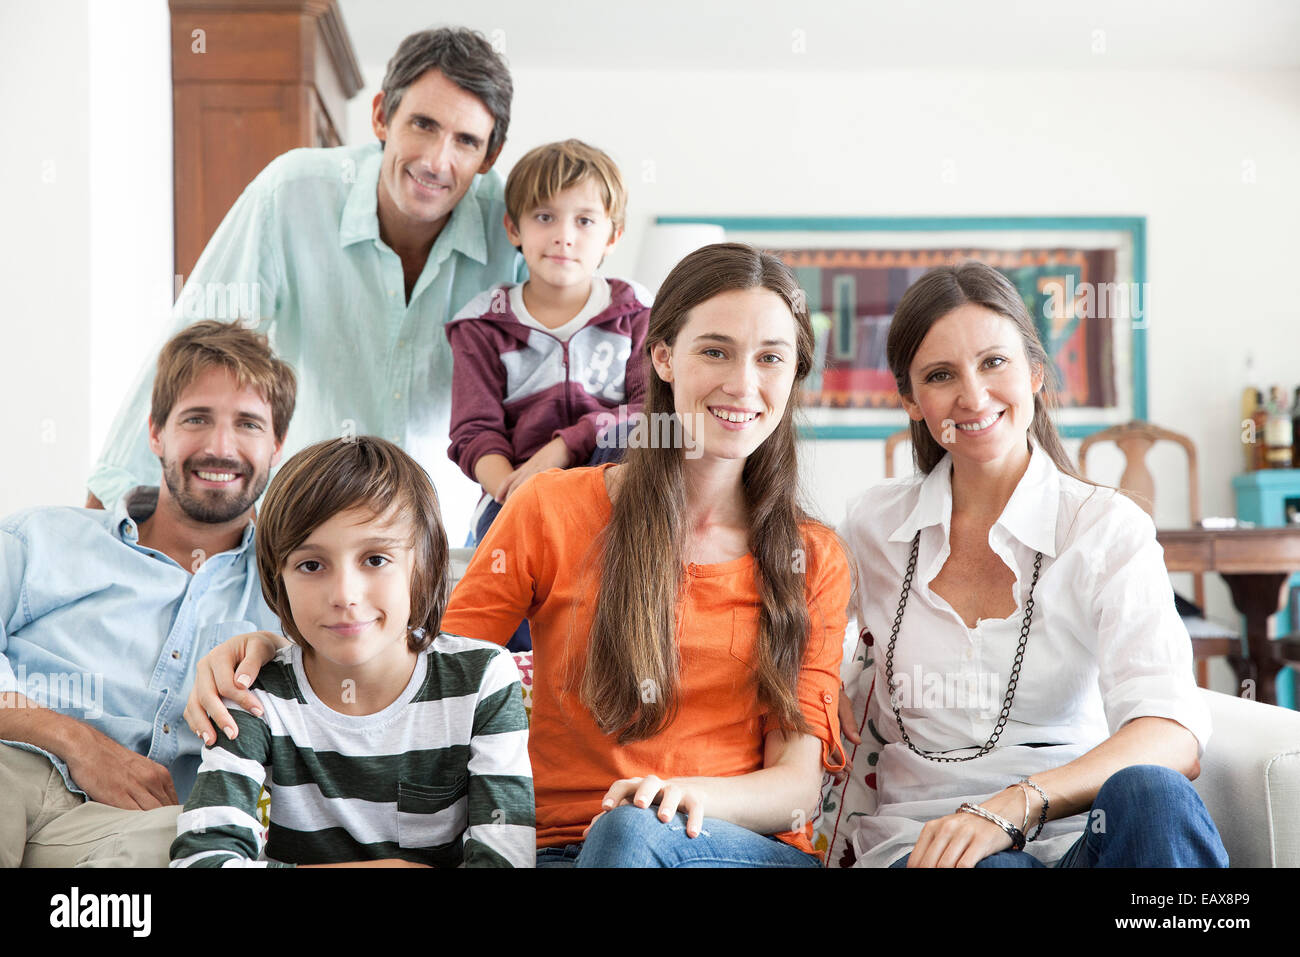 Family together in living room, portrait Stock Photo